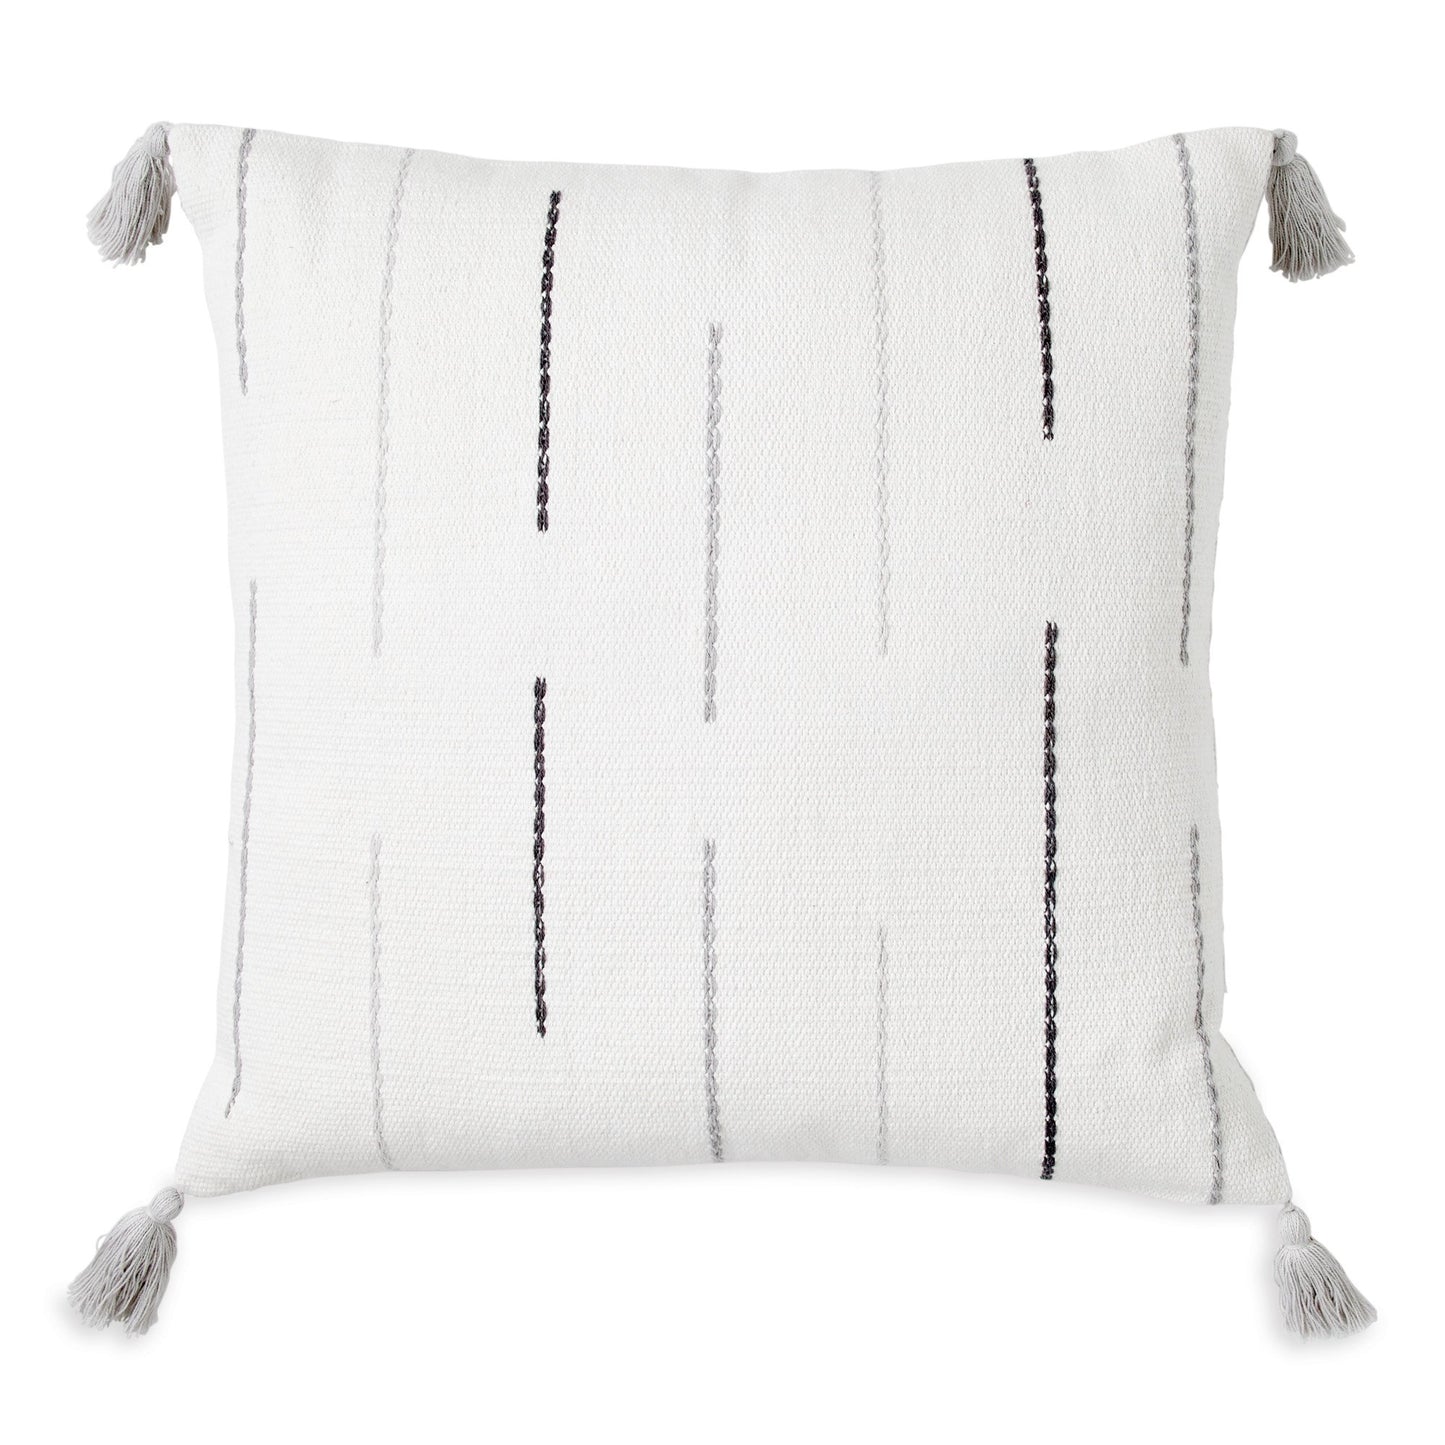 Wellbe Echo Decorative Pillows Blush and Grey